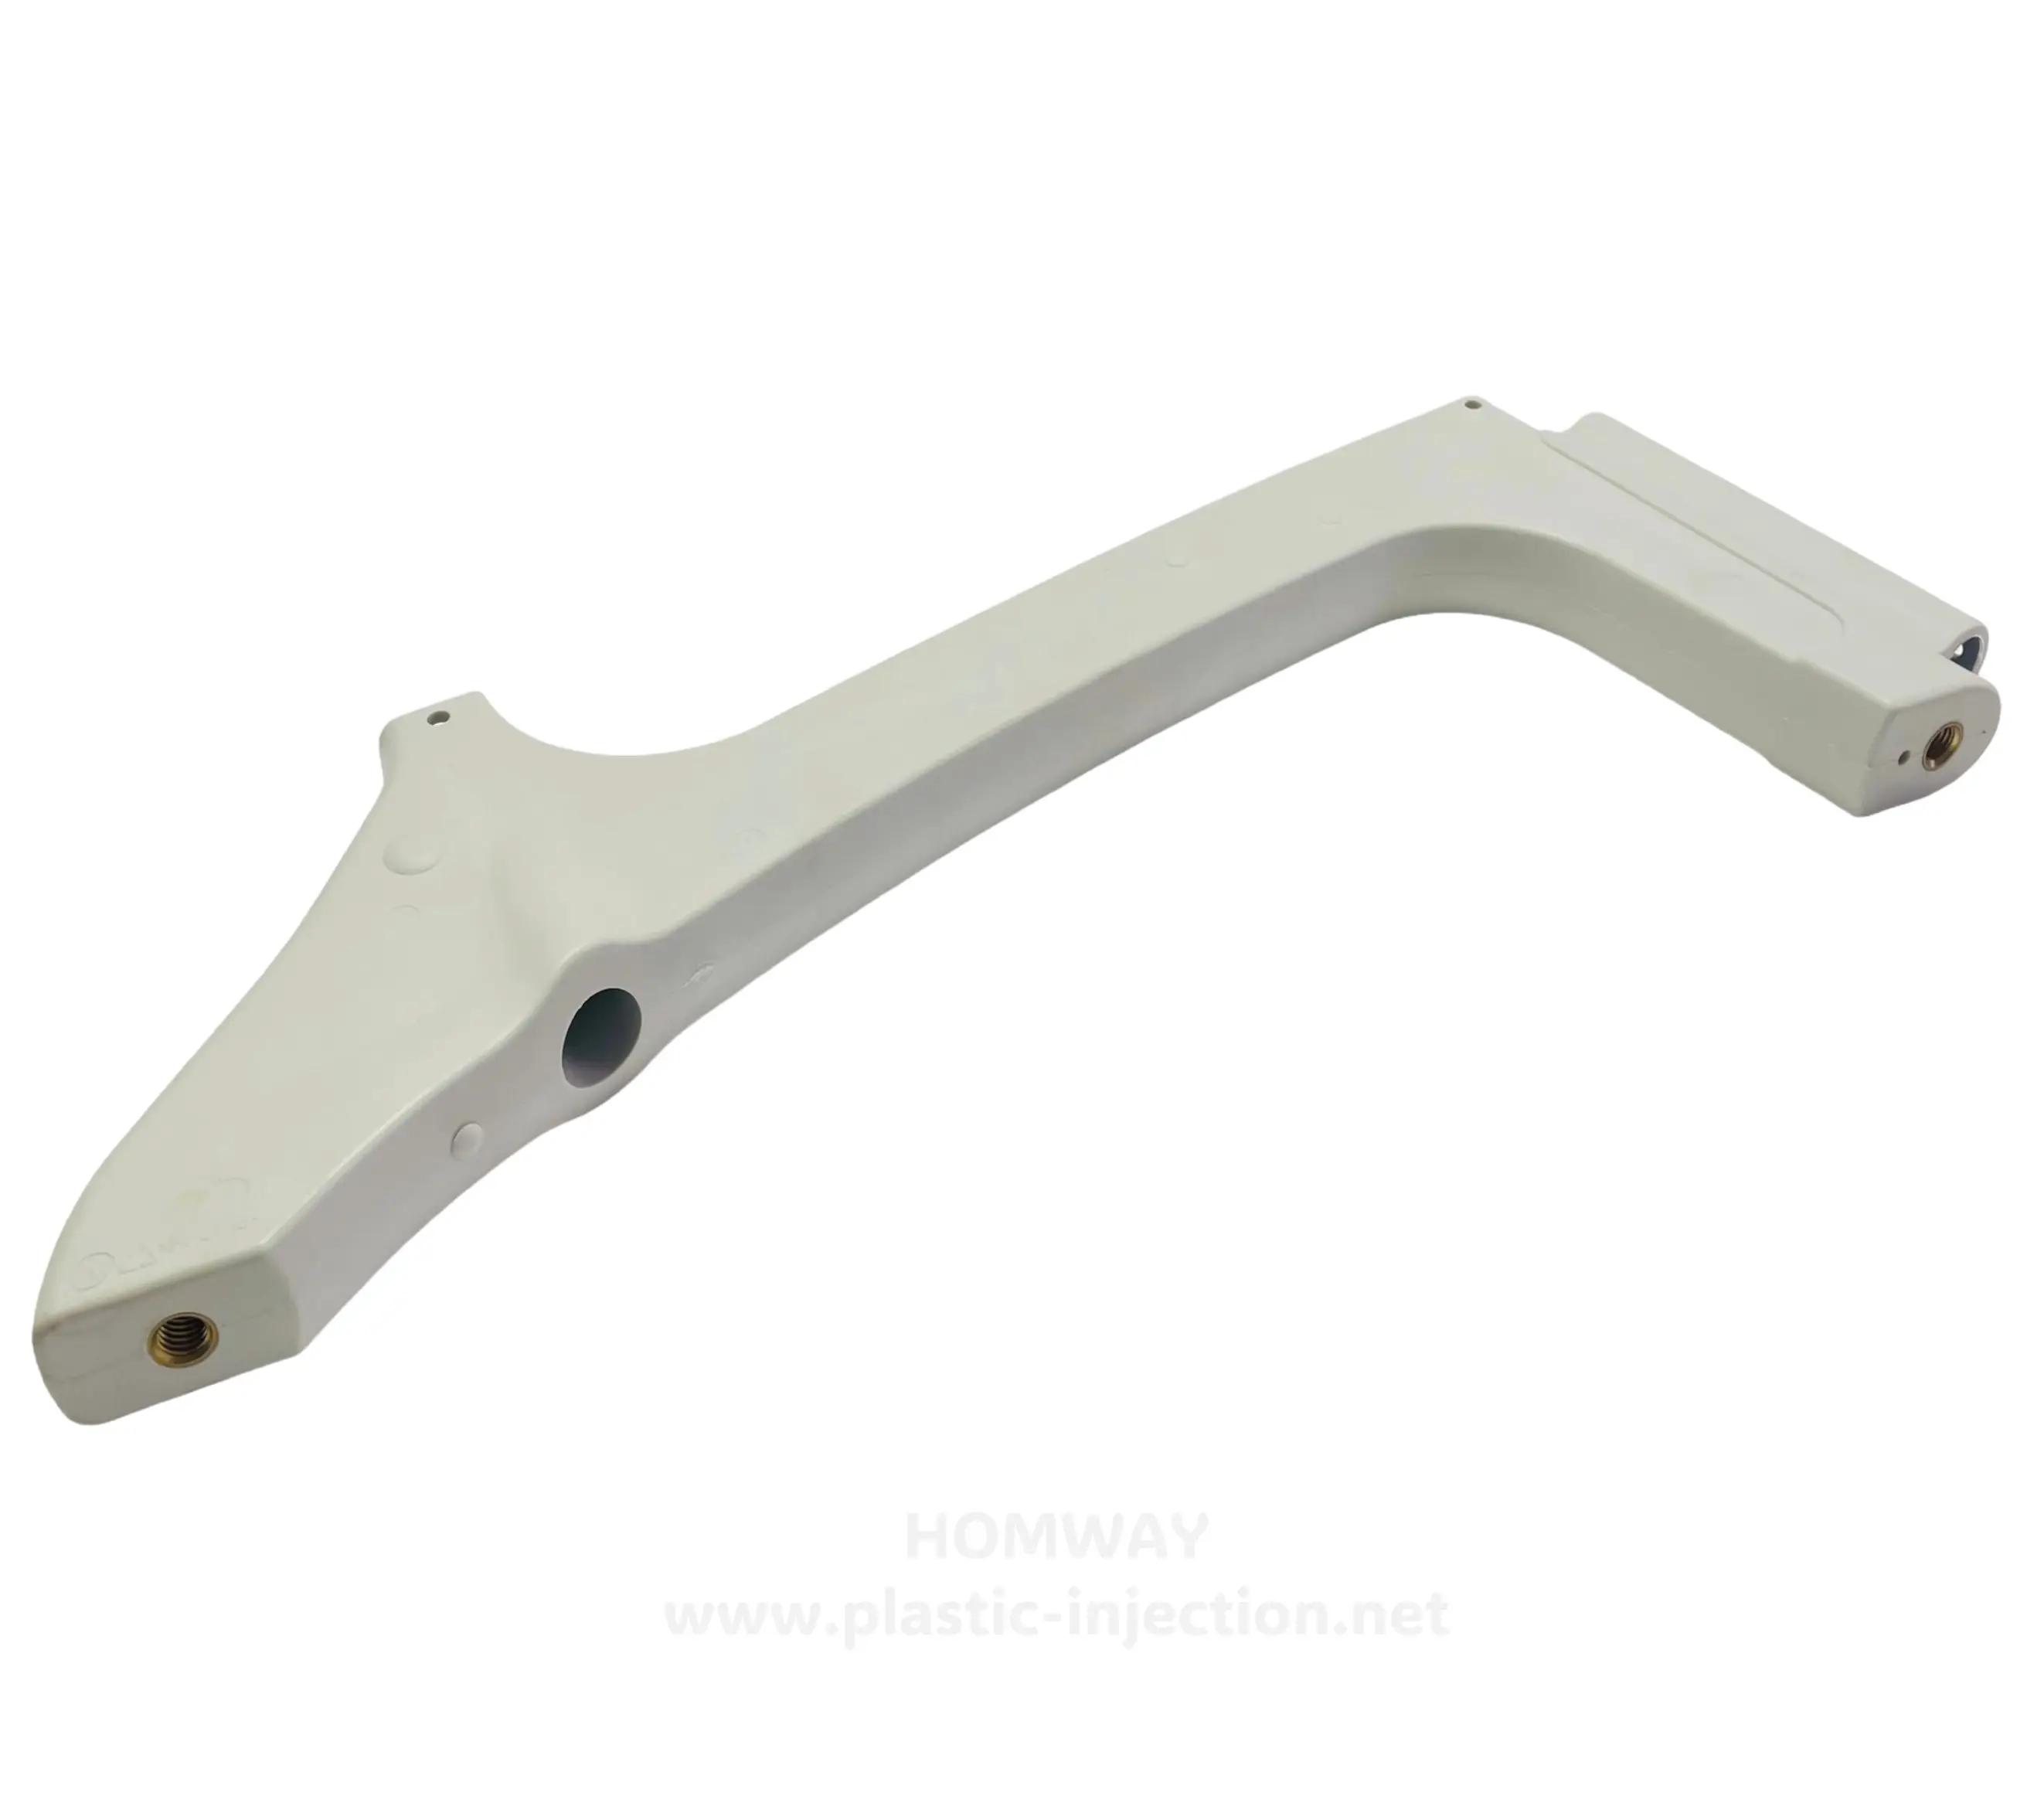 plastic injection molds manufacturer Multi-Purpose Grab Handle for RVs, Trailers, Campers, and Medical Equipment